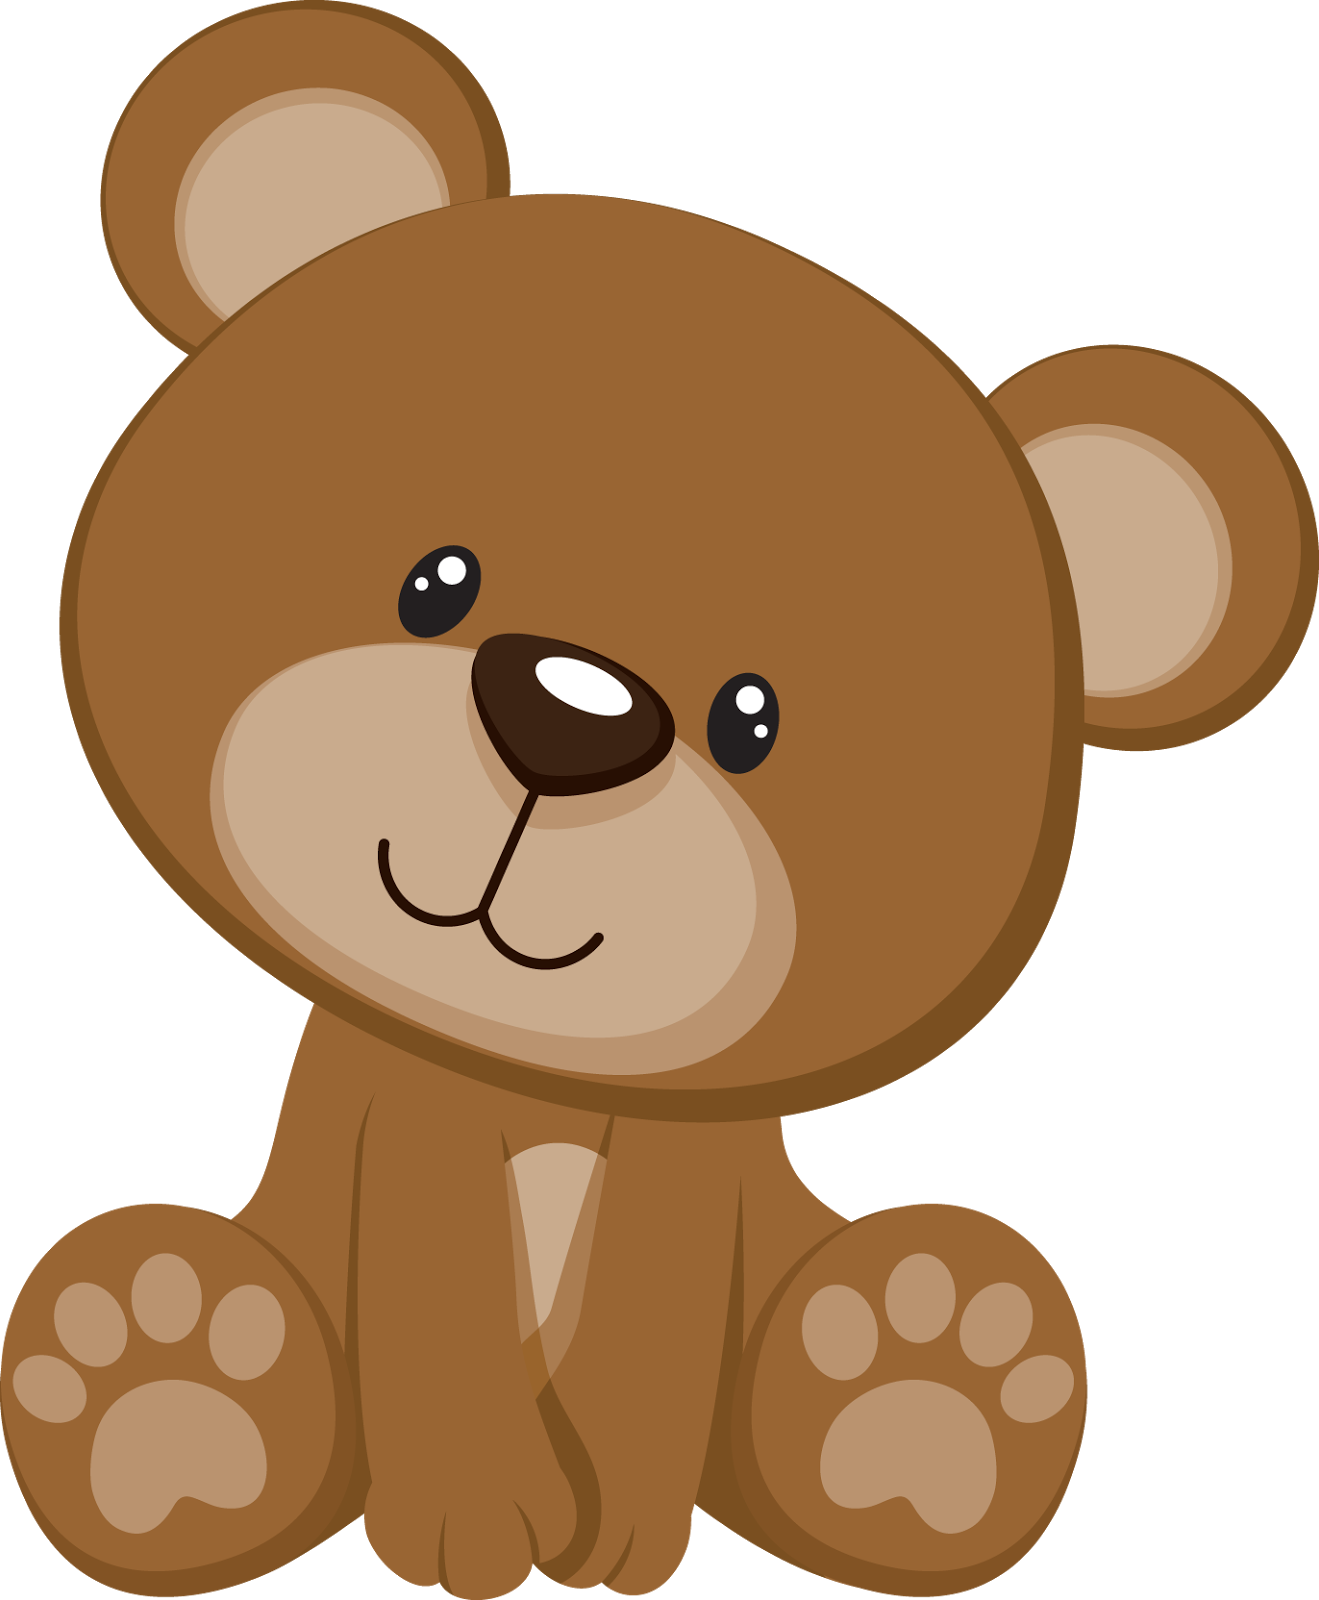 Bear for kids at. Working clipart child